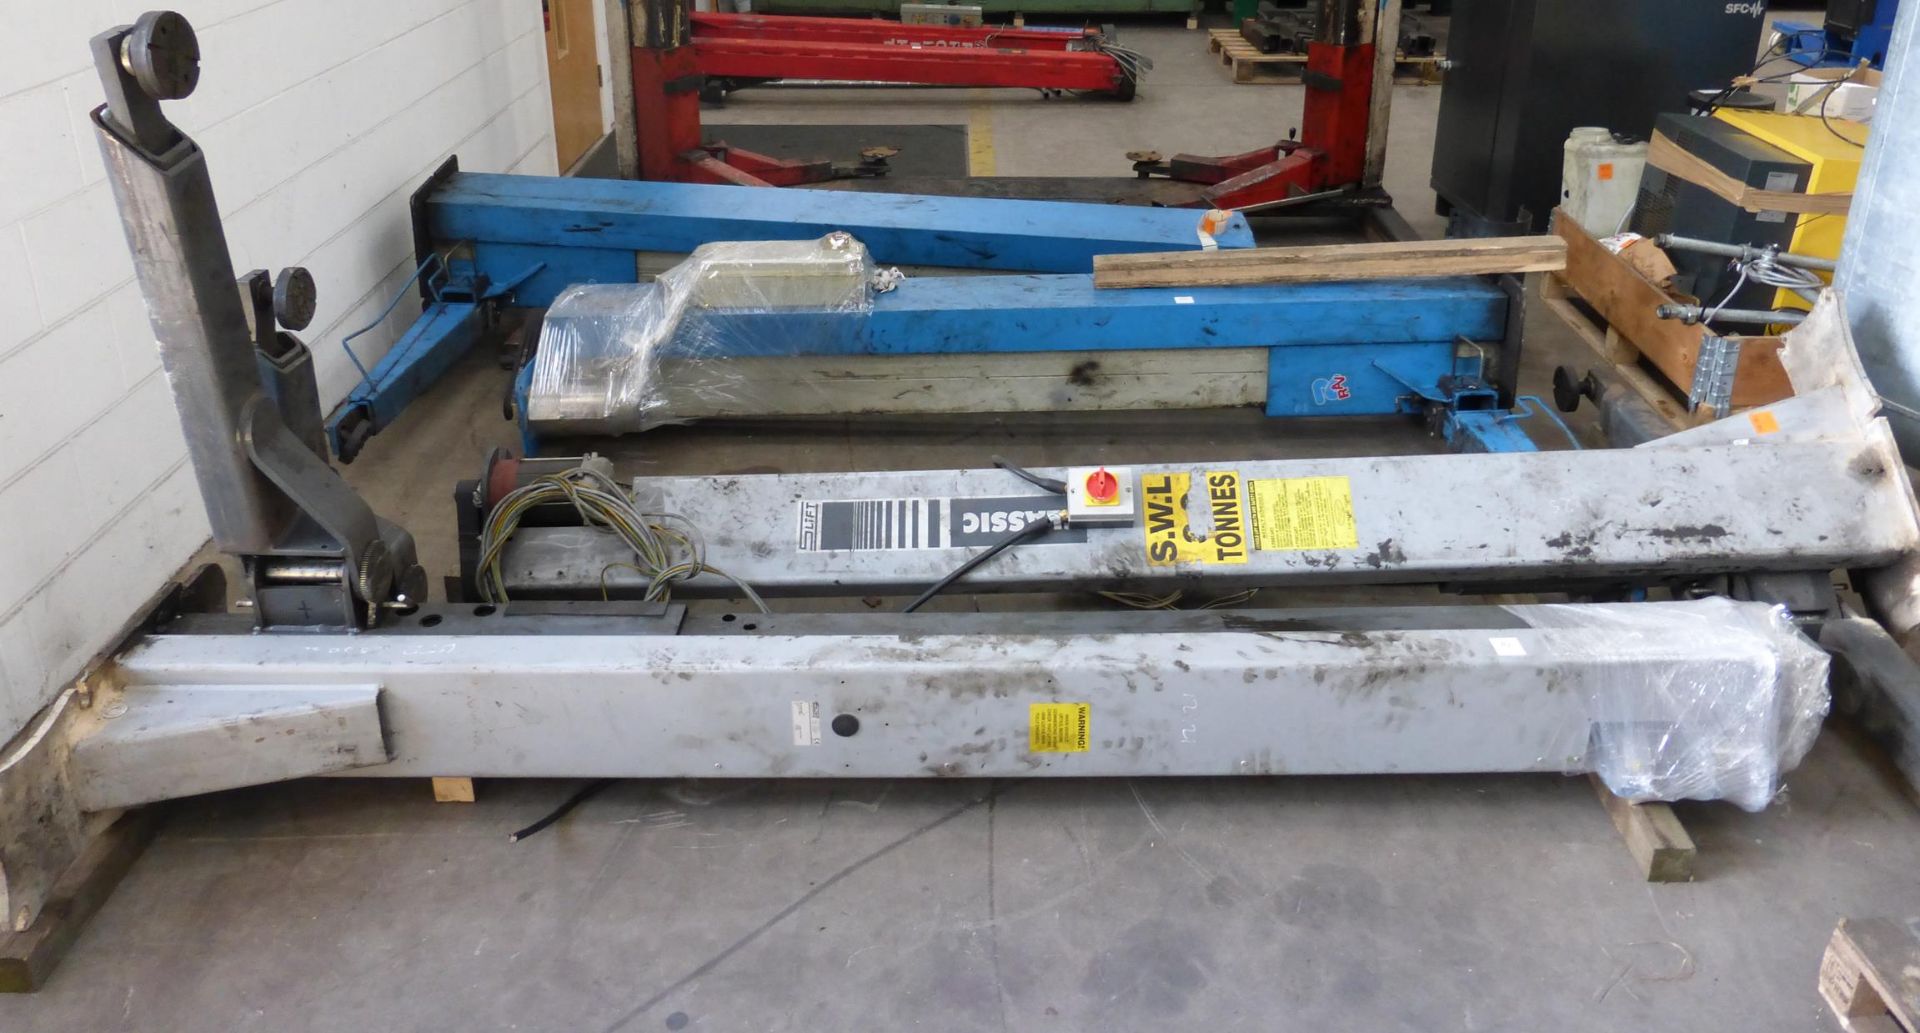 * SLIFT Classic 3 Ton 2 Post Vehicle Lift 3PH (spares or repairs). Please note there is £10 plus VAT - Image 4 of 8